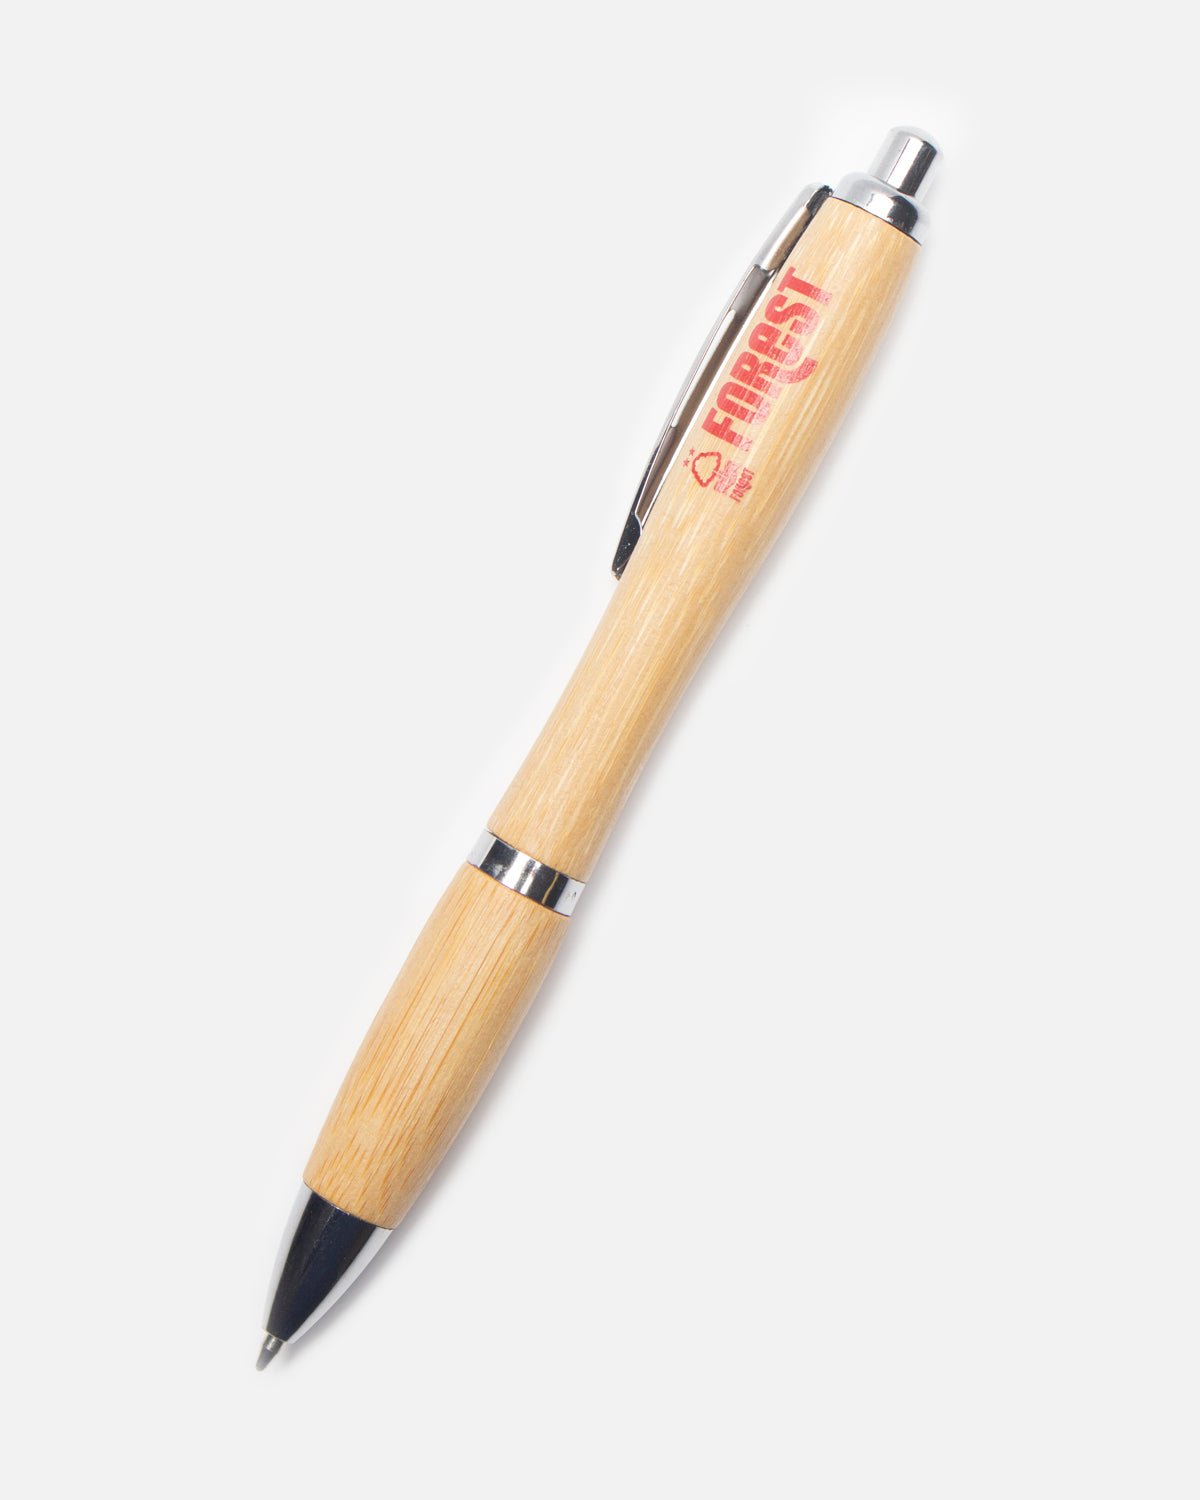 NFFC Bamboo Pen - Nottingham Forest FC